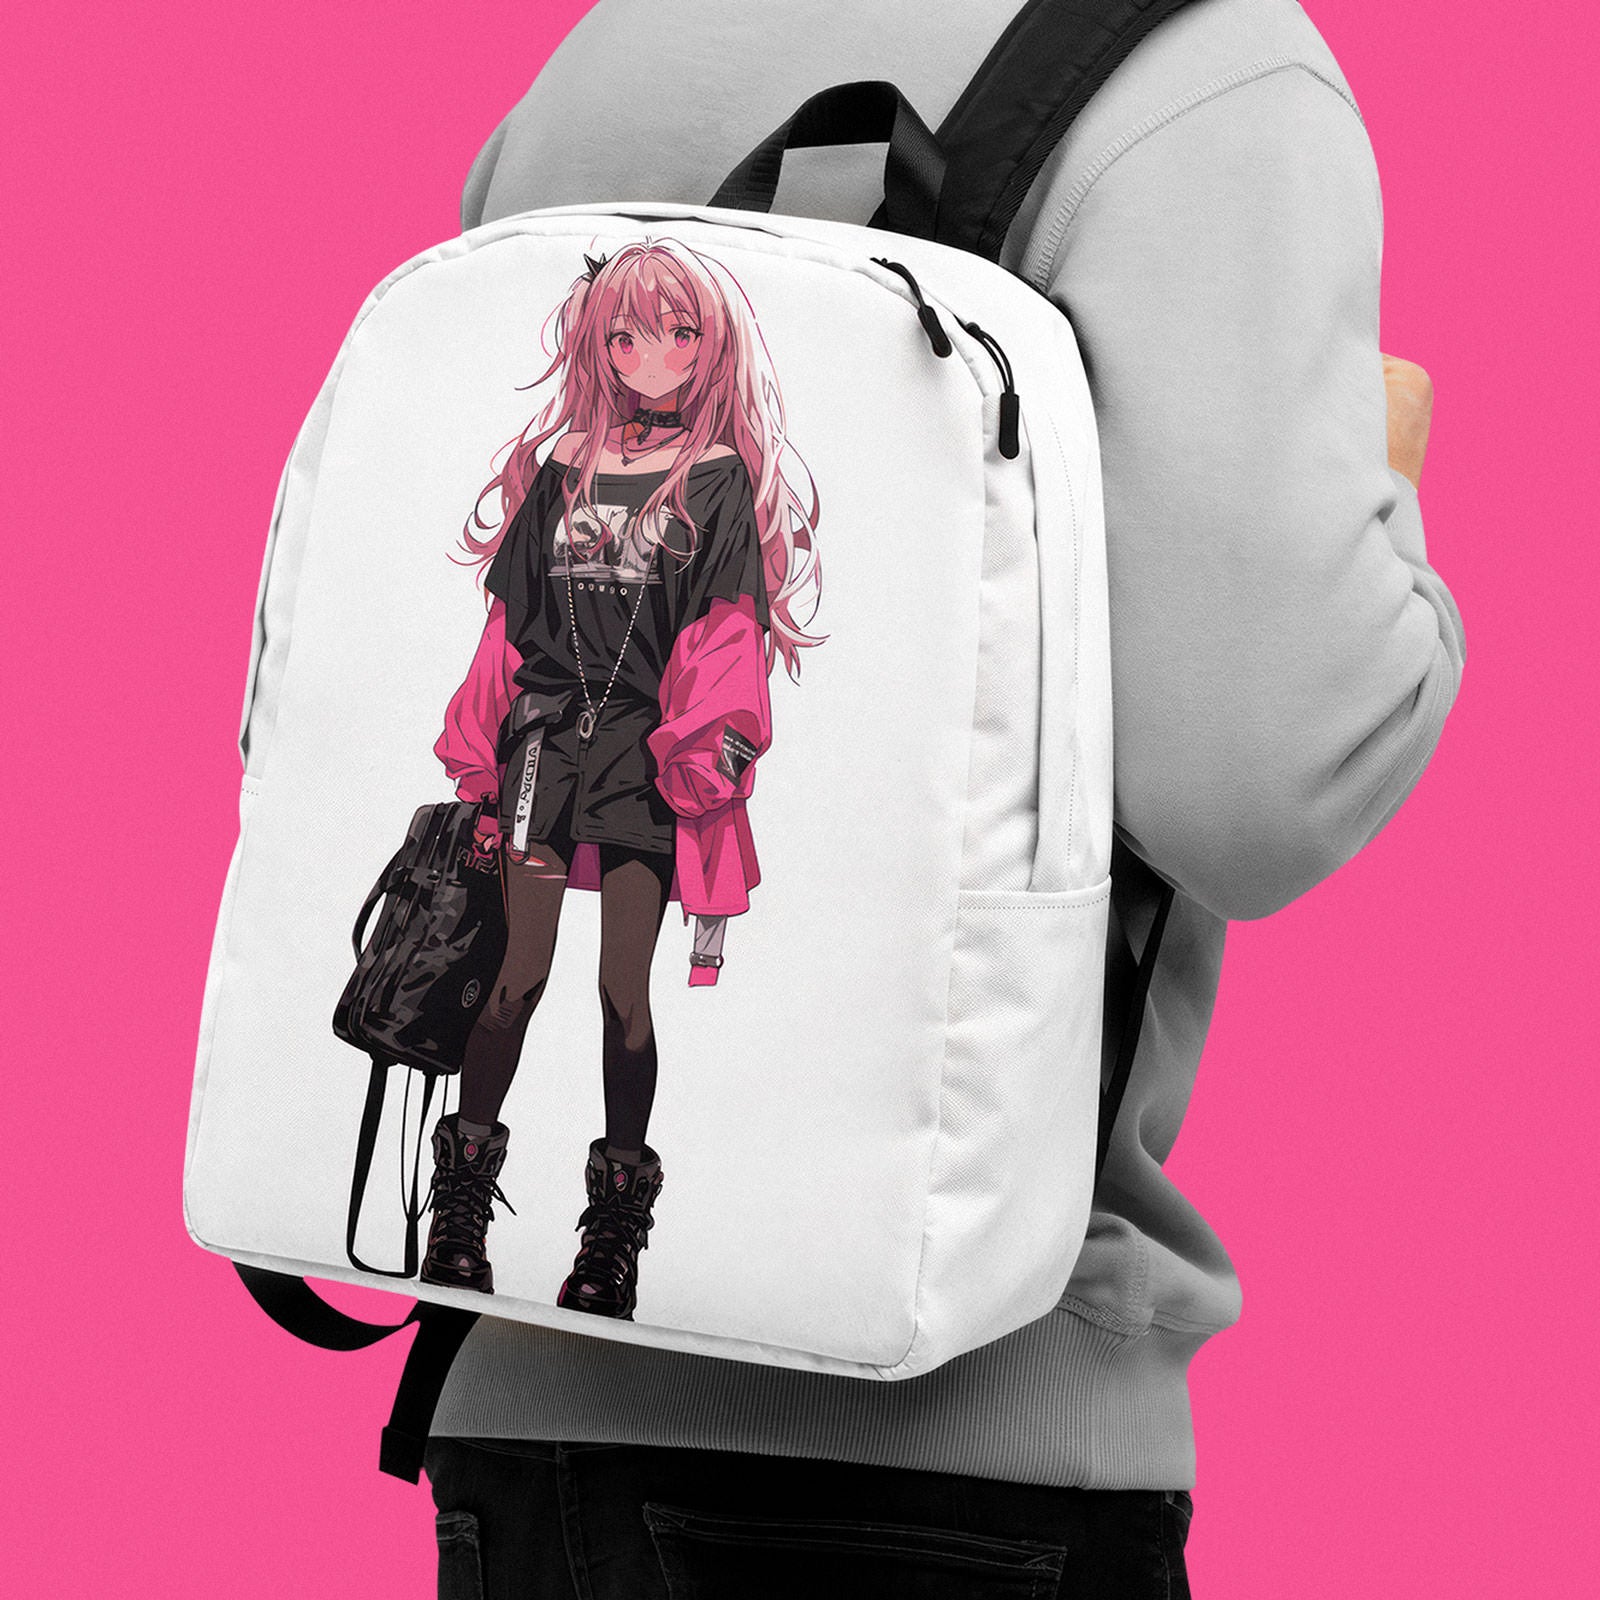 If you often find yourself burdened by the weight of your possessions wherever you go, then this backpack is tailor-made for you. Designed with a roomy main section, complete with a dedicated laptop pocket, and featuring a discreet back pocket for securely stashing your most precious belongings.